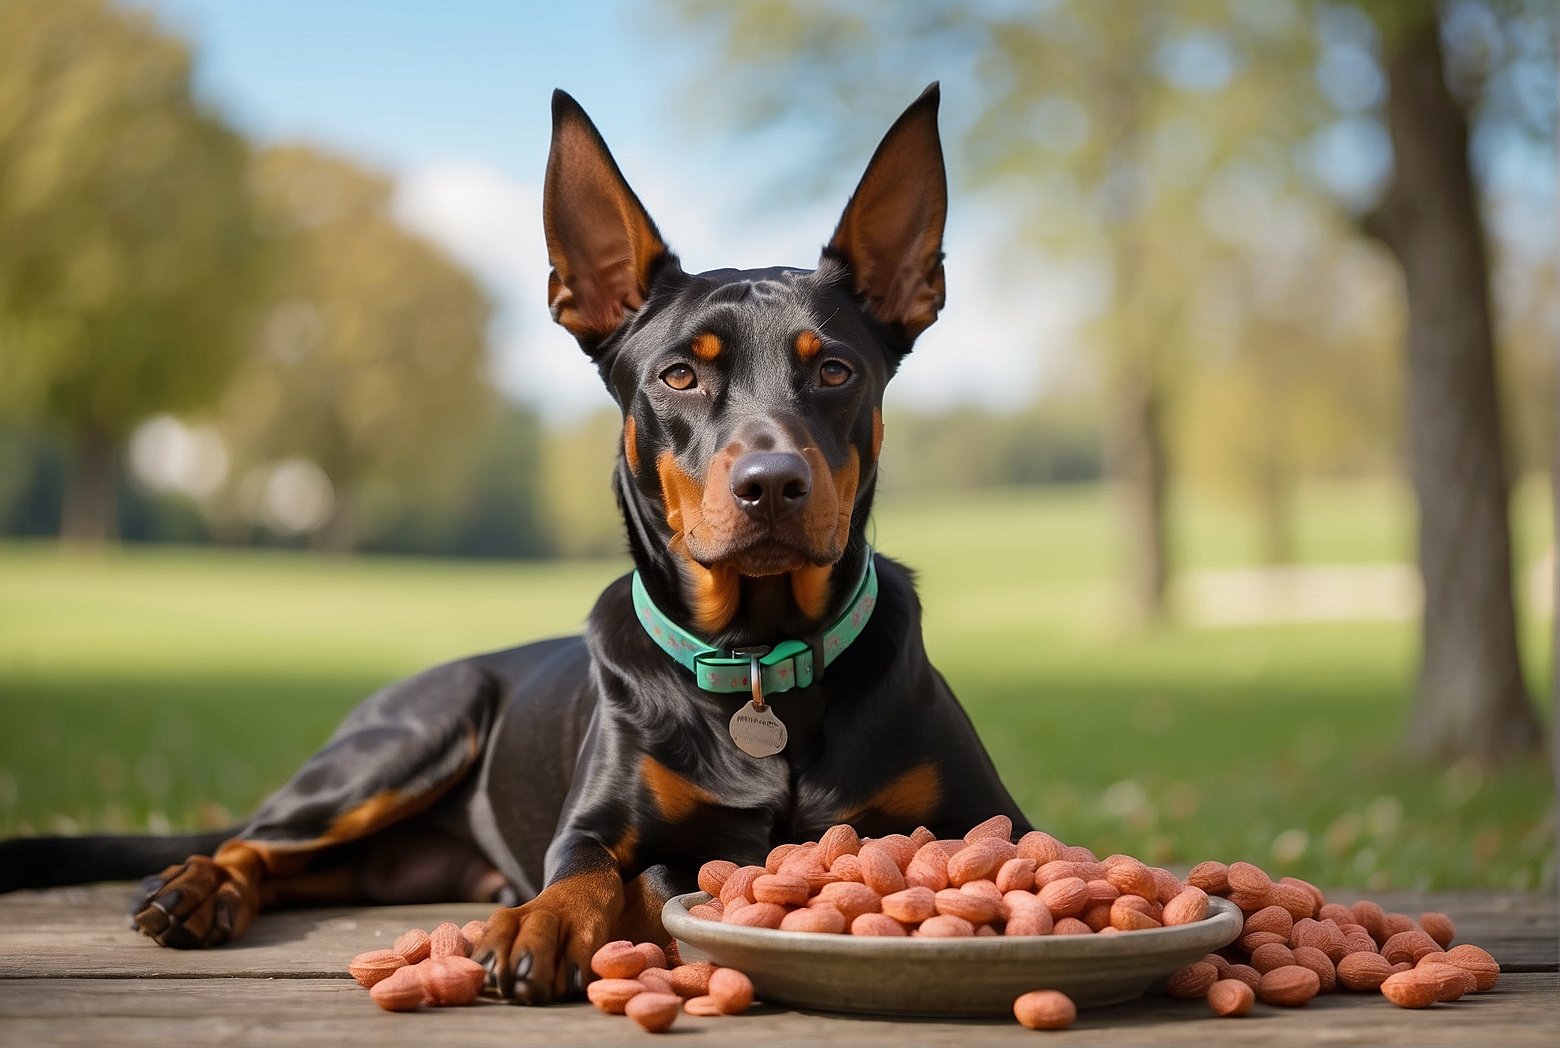 The Top Allergy-Friendly Dog Foods for Dobermans